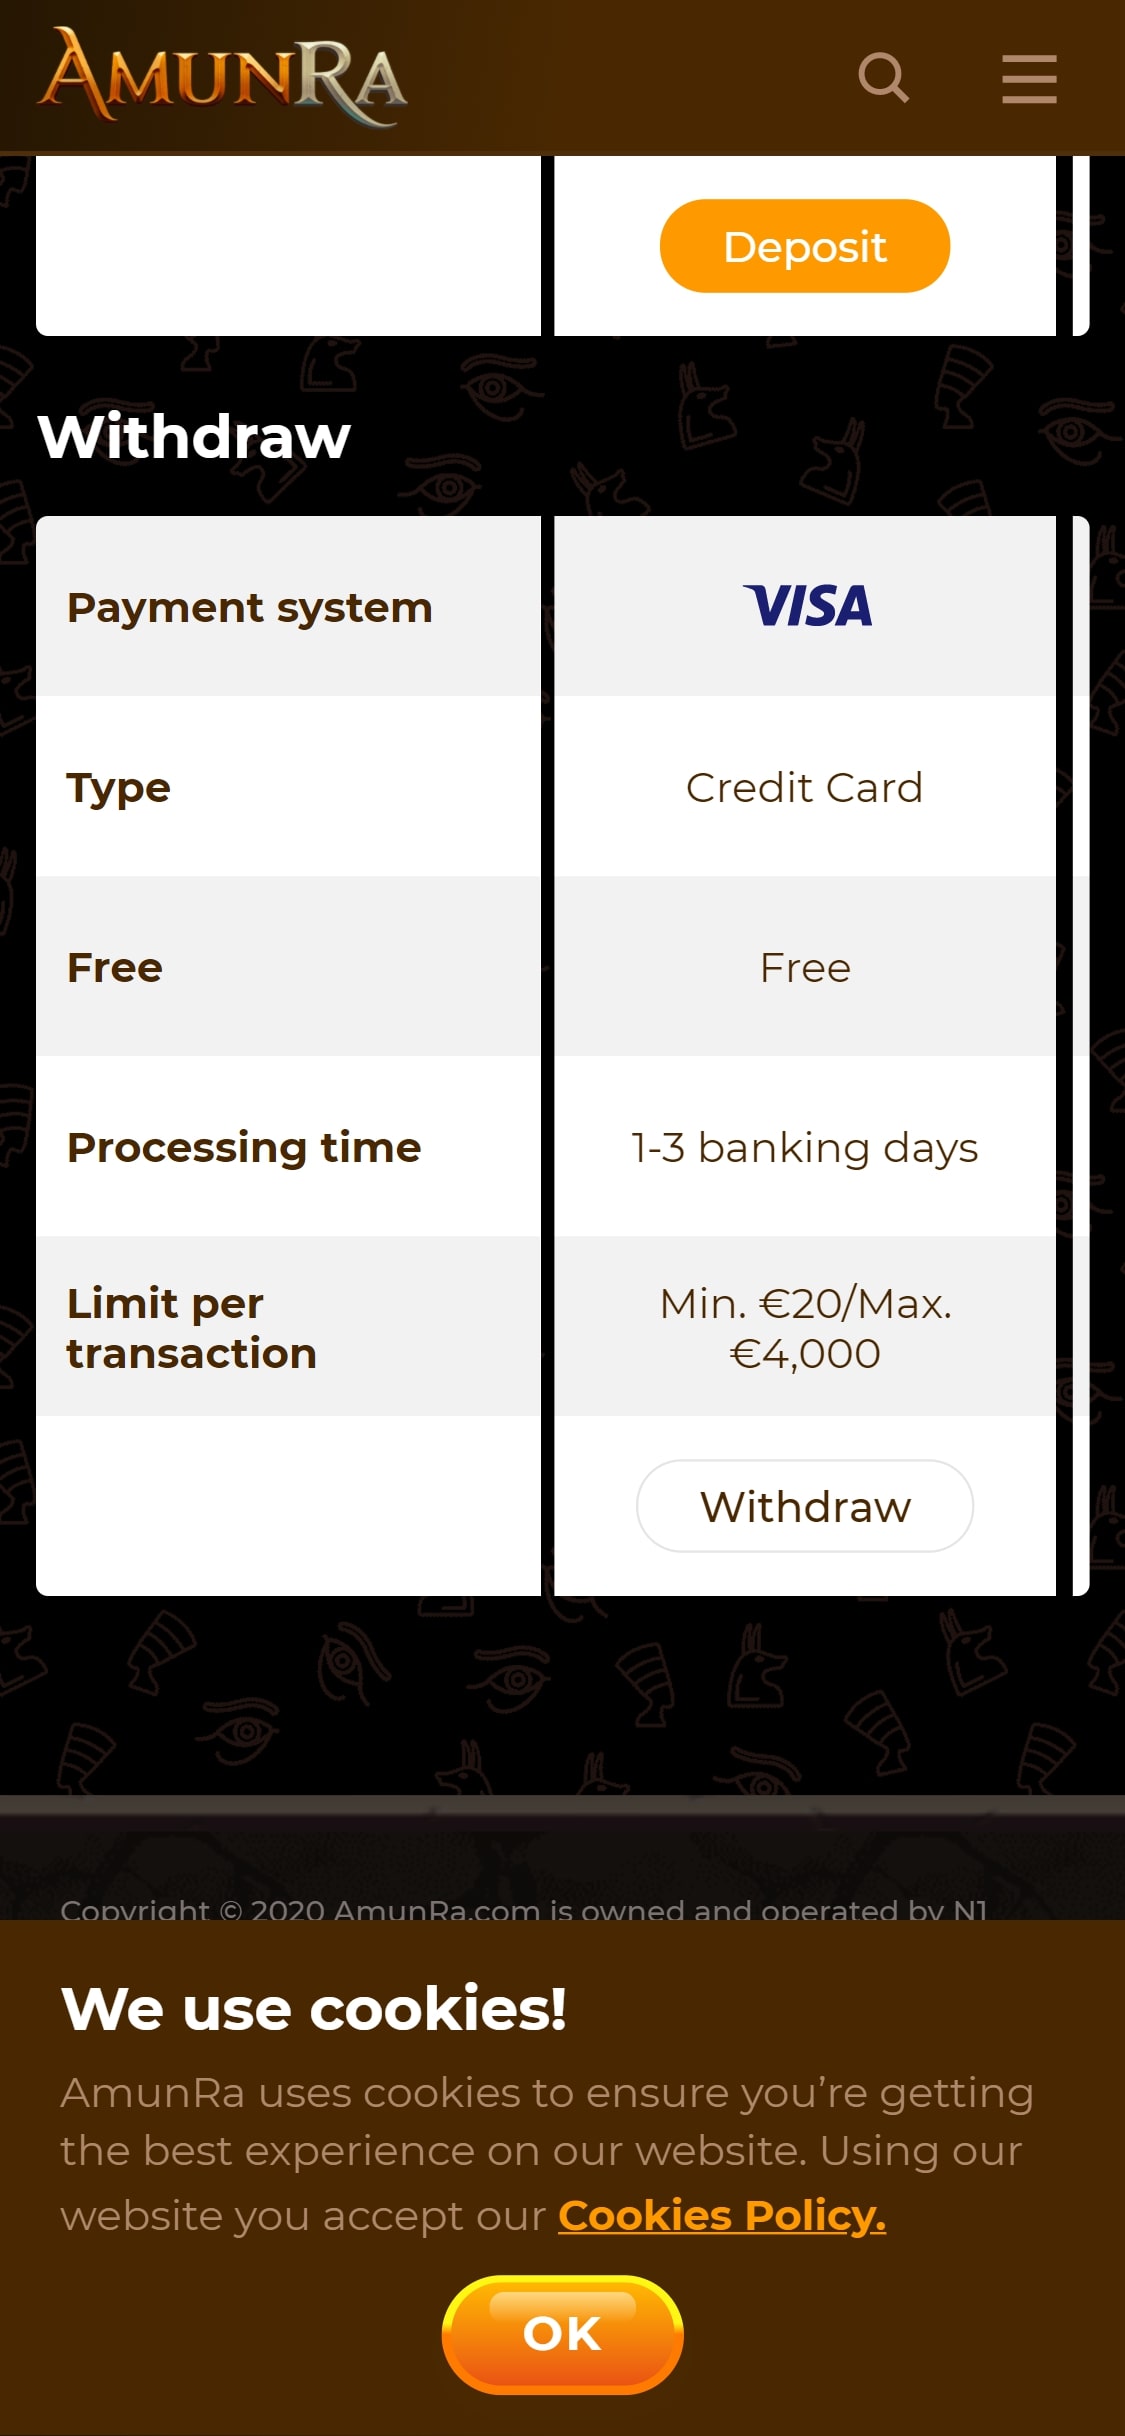 Amunra Casino Mobile Payment Methods Review